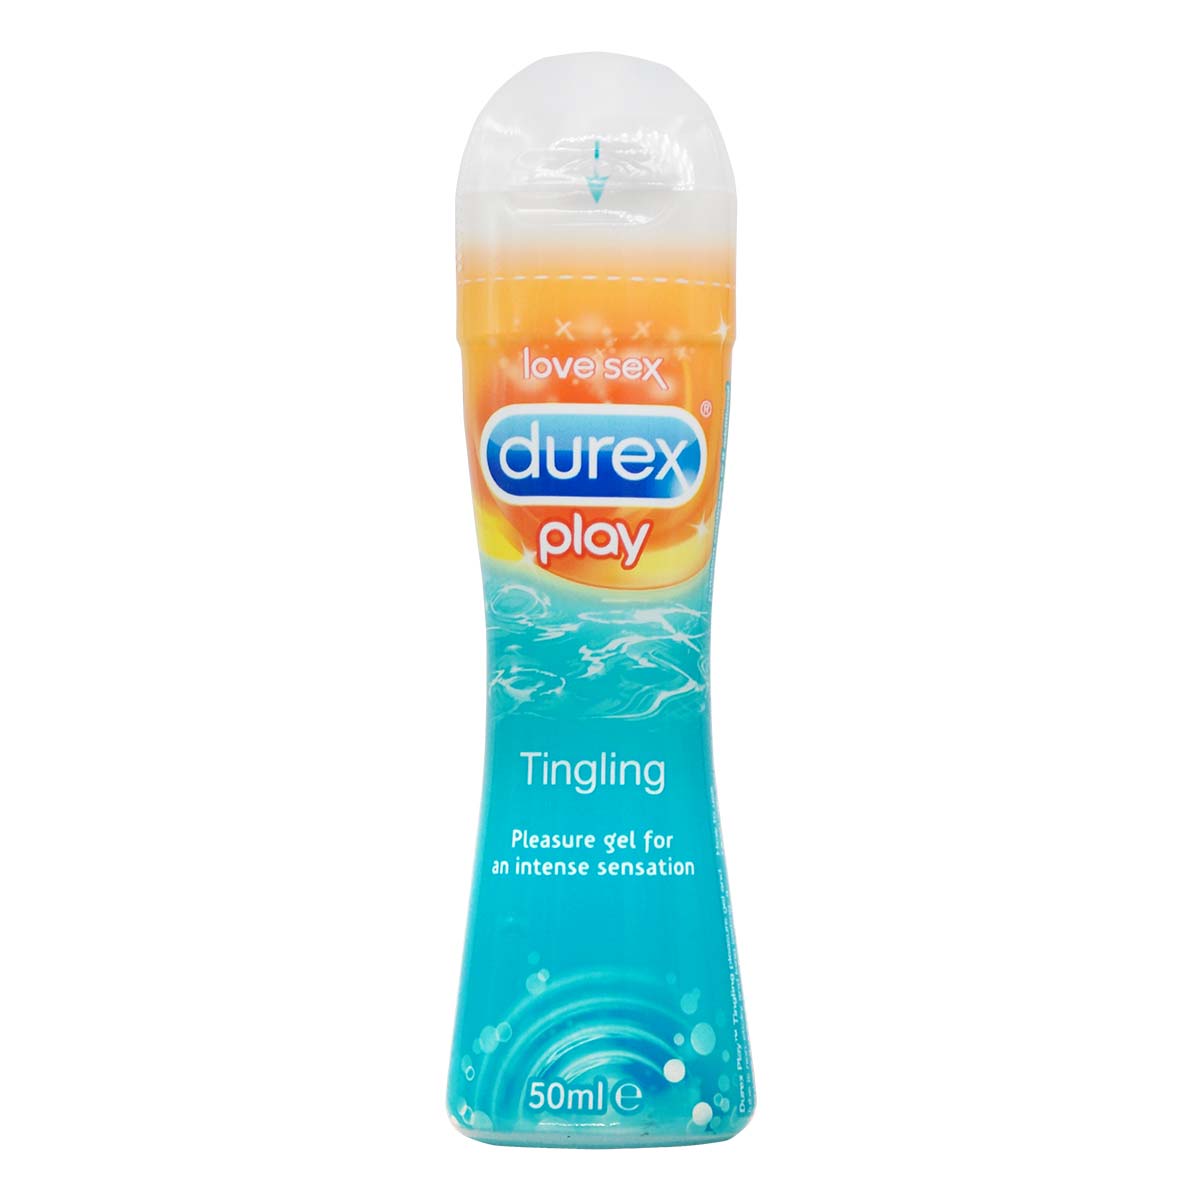 Durex Play Tingling Intimate Lube 50ml Water-based Lubricant (Short Expiry)-p_2